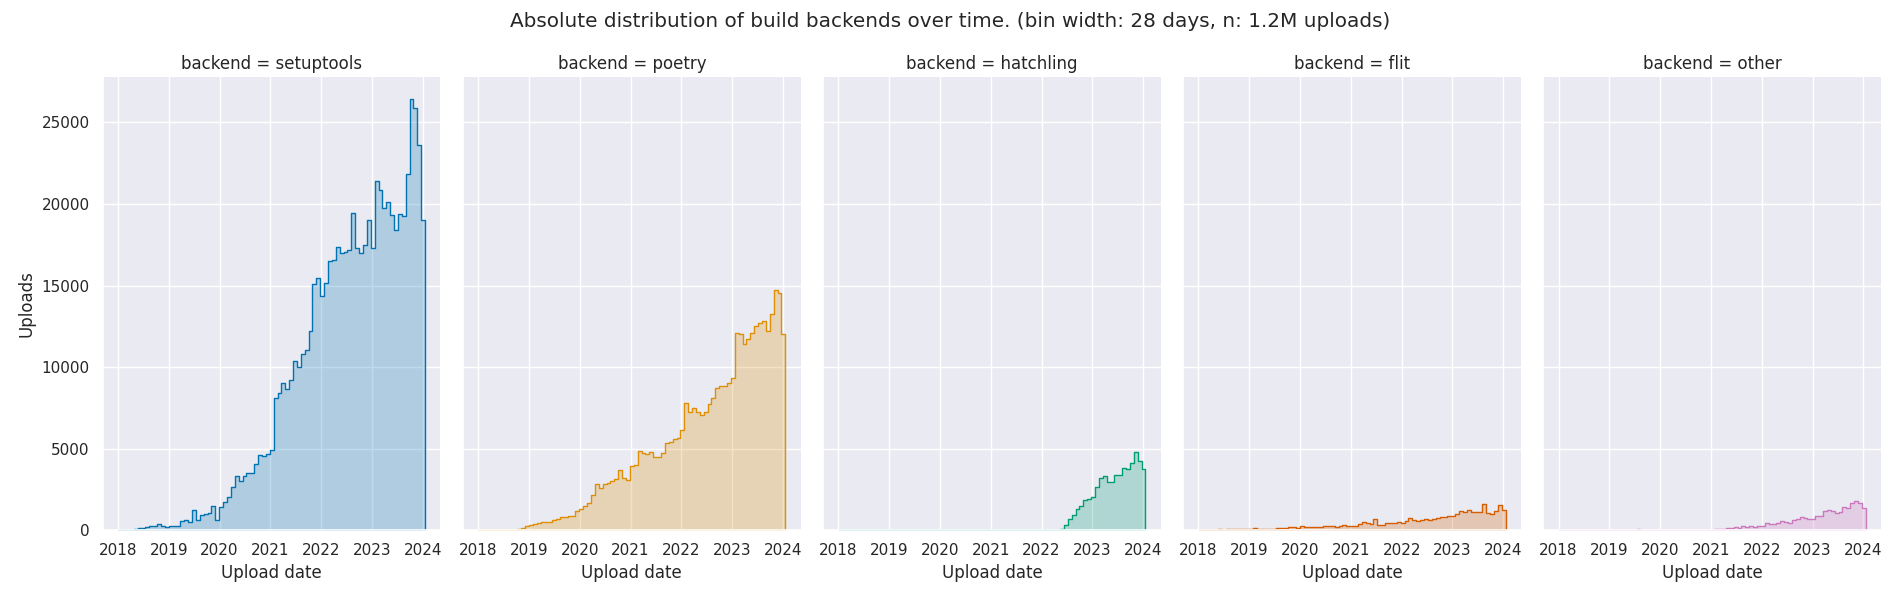 Absolute distribution of build backends over time